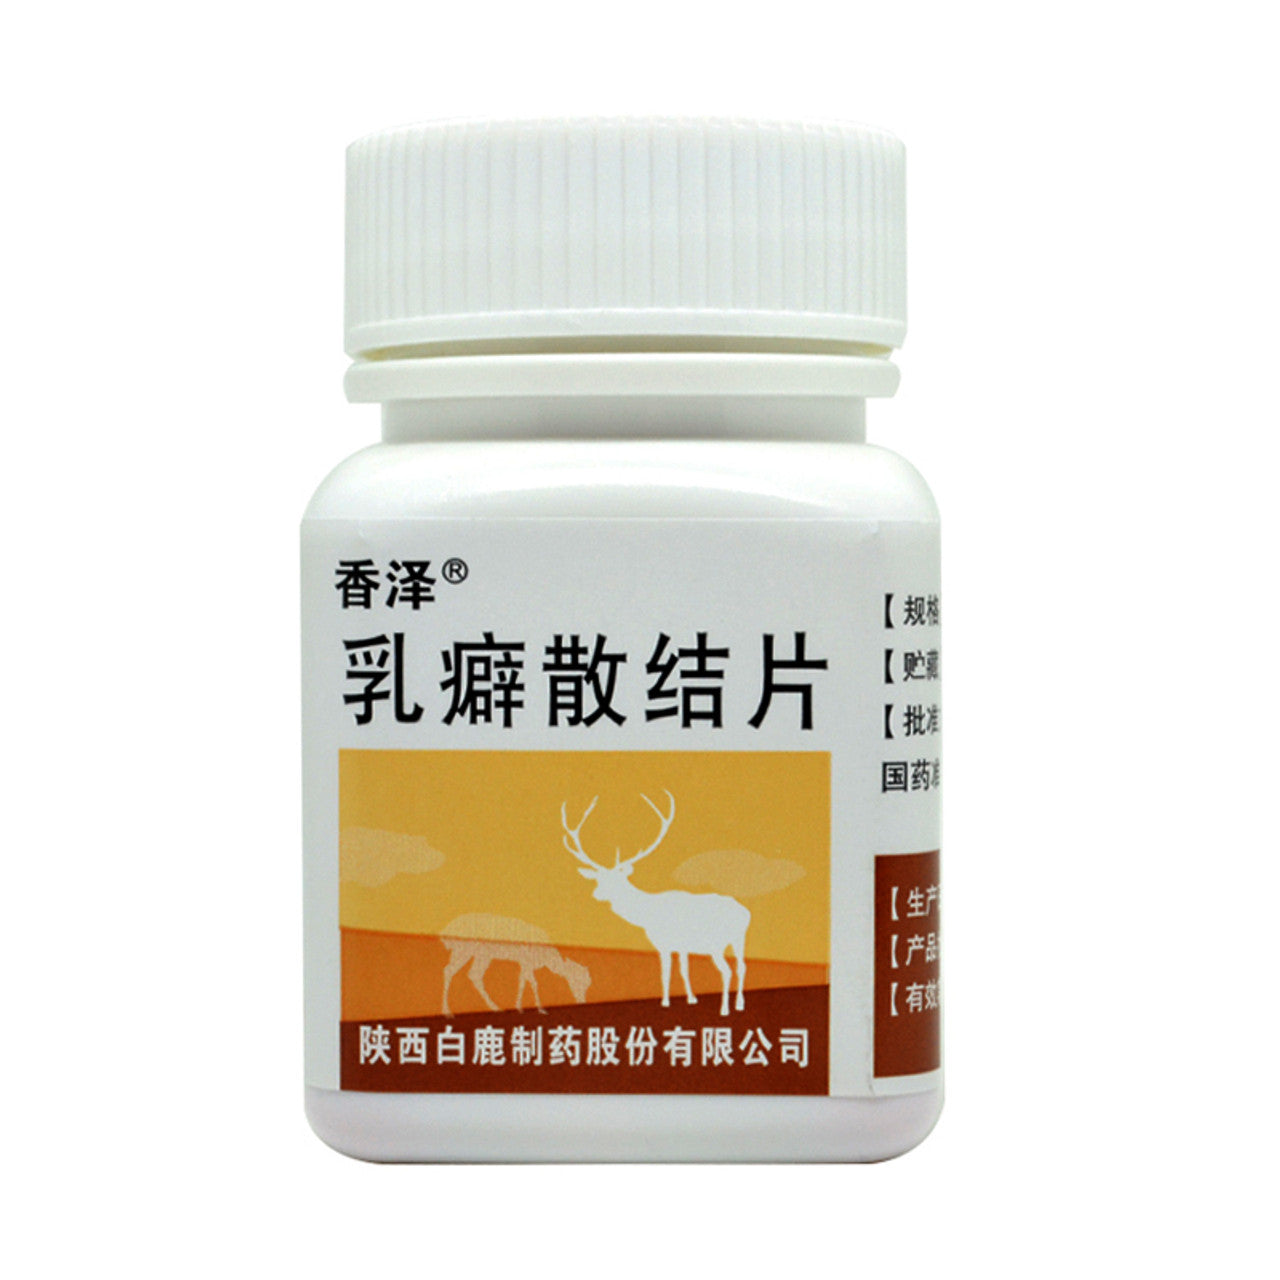 China Herb. Rupi Sanjie Pian or Rupi Sanjie Tablets or Ru Pi San Jie Pian for  breast hyperplasia caused by qi stagnation and blood stasis. Symptoms: breast pain, breast lumps, irritability, fullness of the chest and flanks, etc.